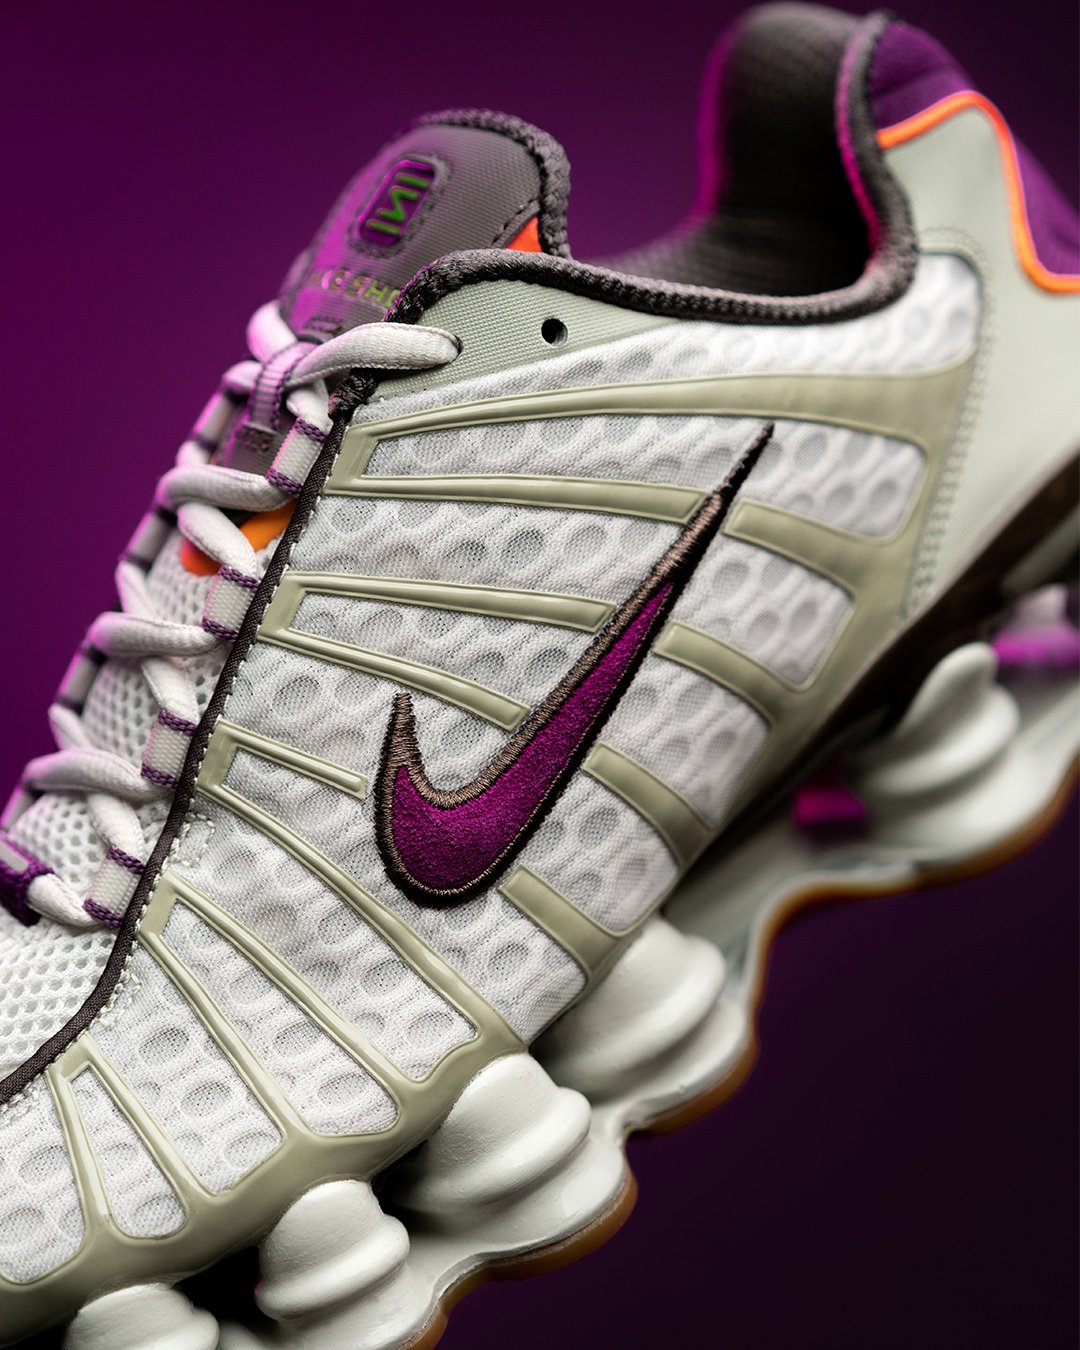 size? on Twitter: "Coming soon to size? The @nike Shox TL 'Viotech' -size? exclusive will be available online in selected size? stores on 06/07 - #sizeHQ Read more: https://t.co/58gwO4qv1R https://t.co/98PKzMBuMz" /